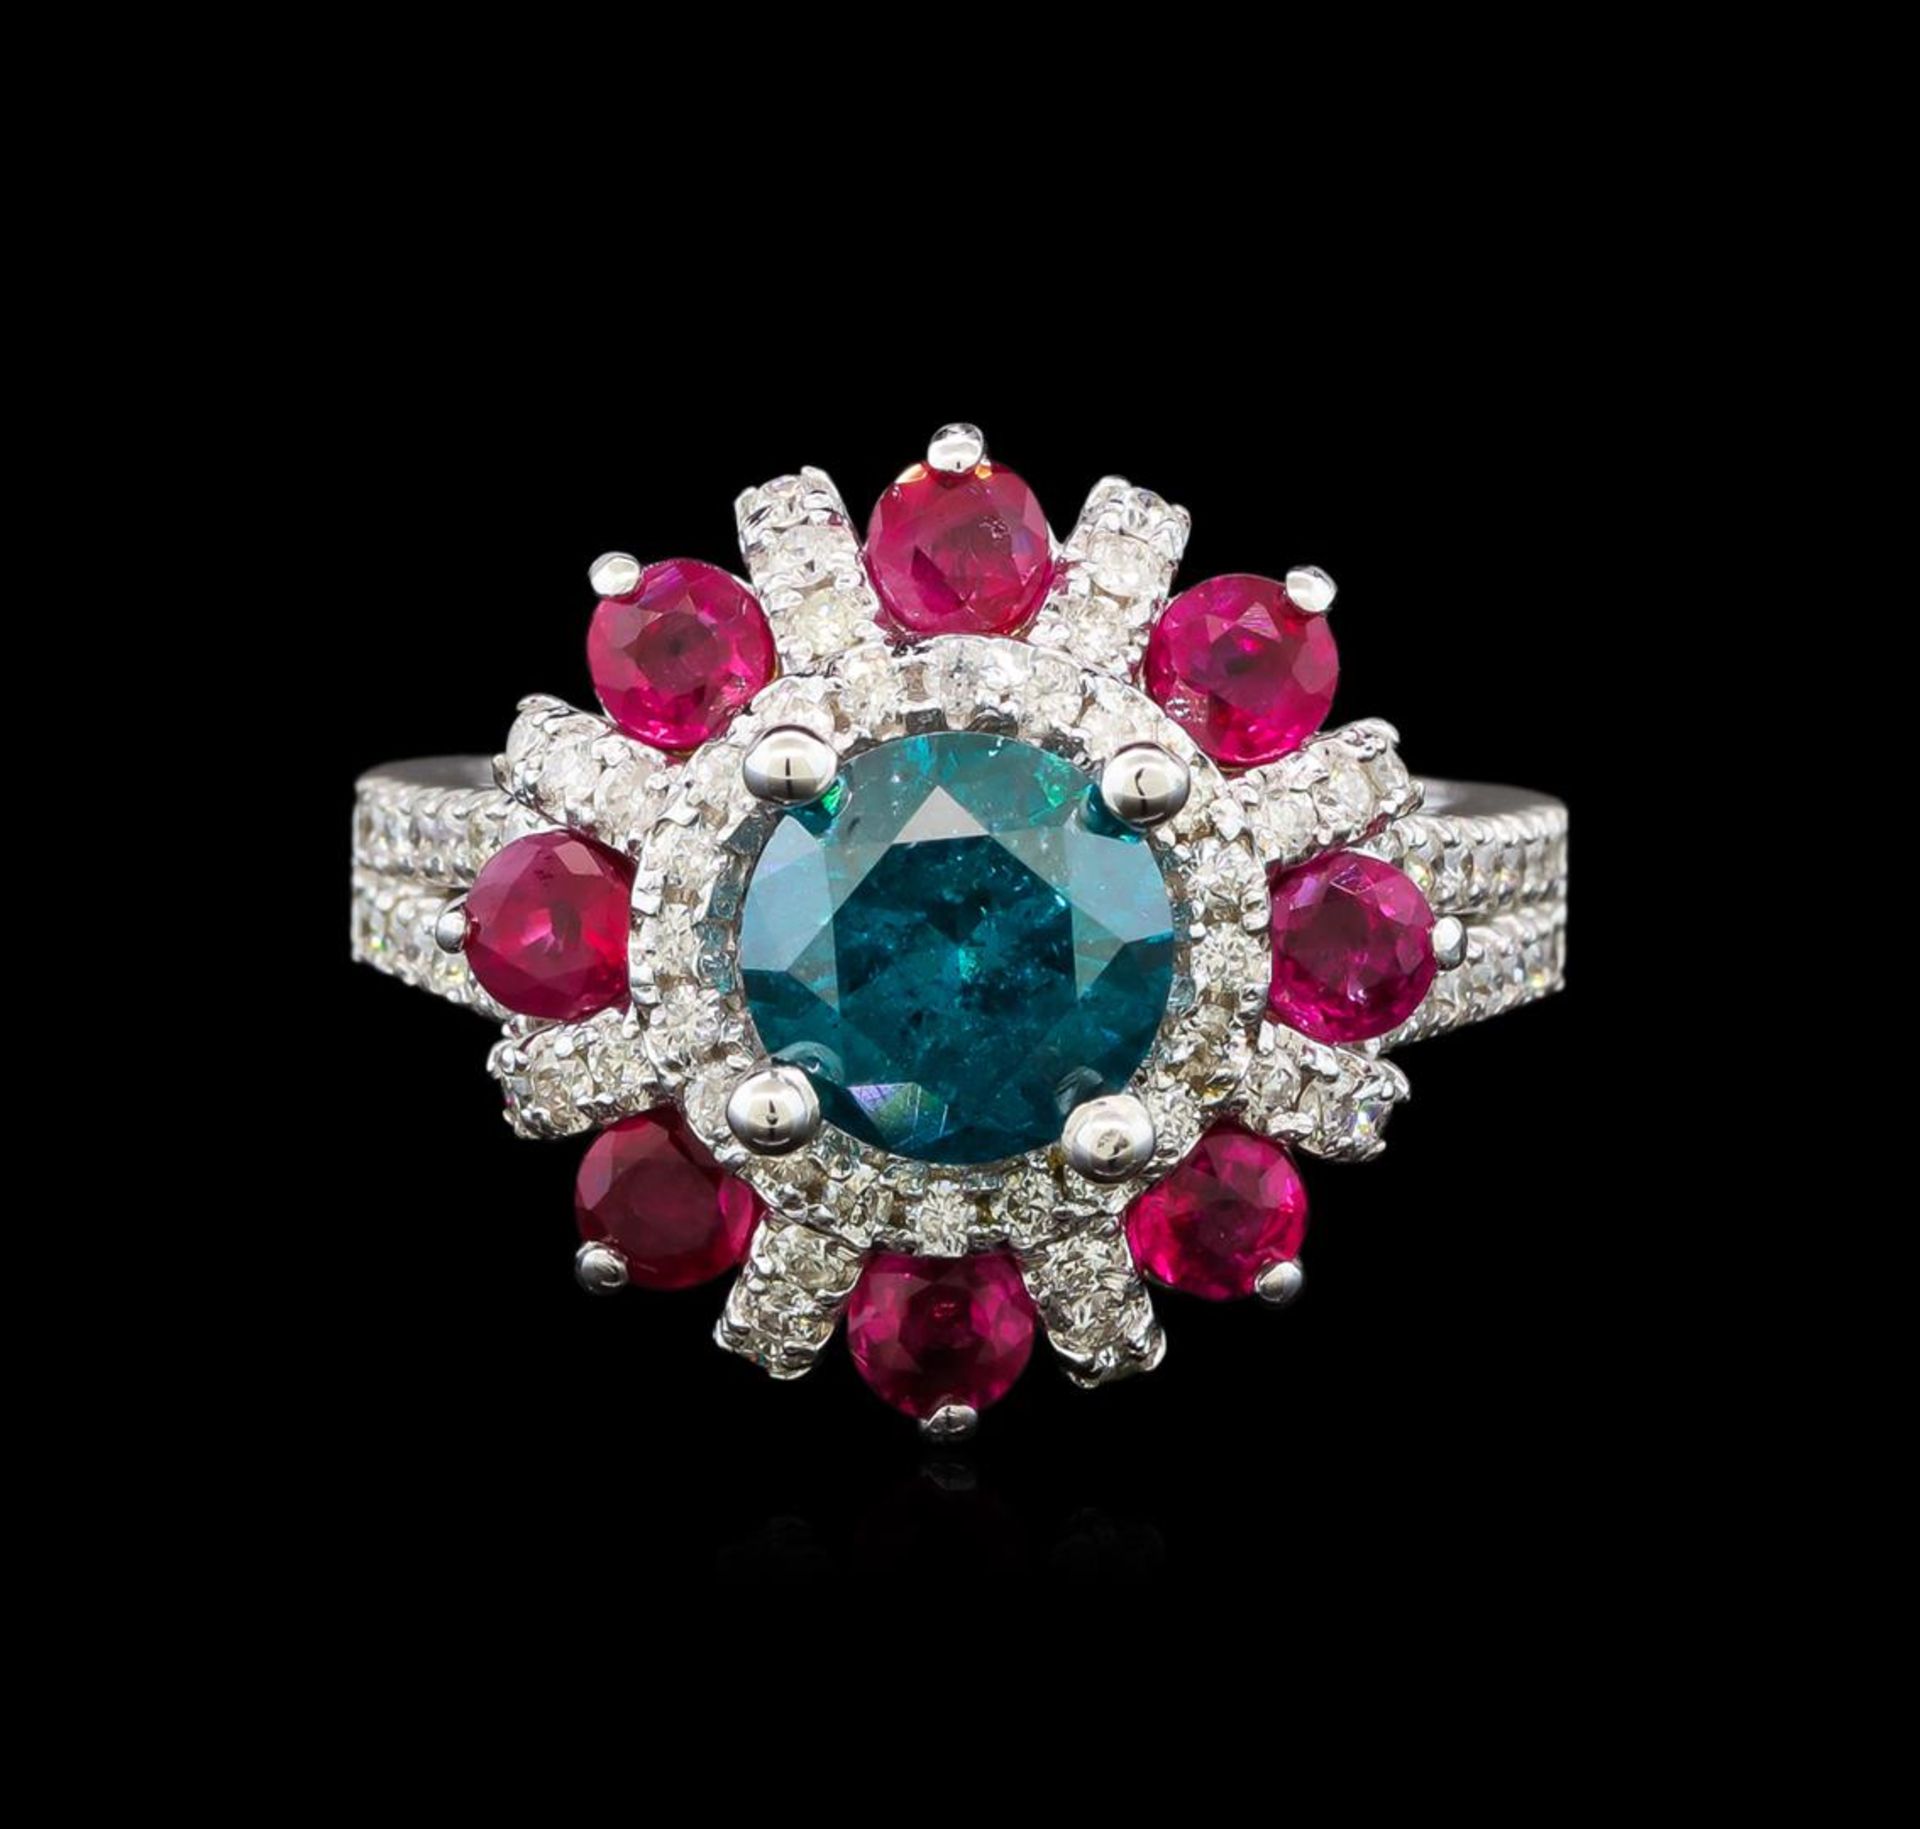 14KT White Gold 1.89 ctw Fancy Blue Diamond and Ruby Ring - Image 2 of 5